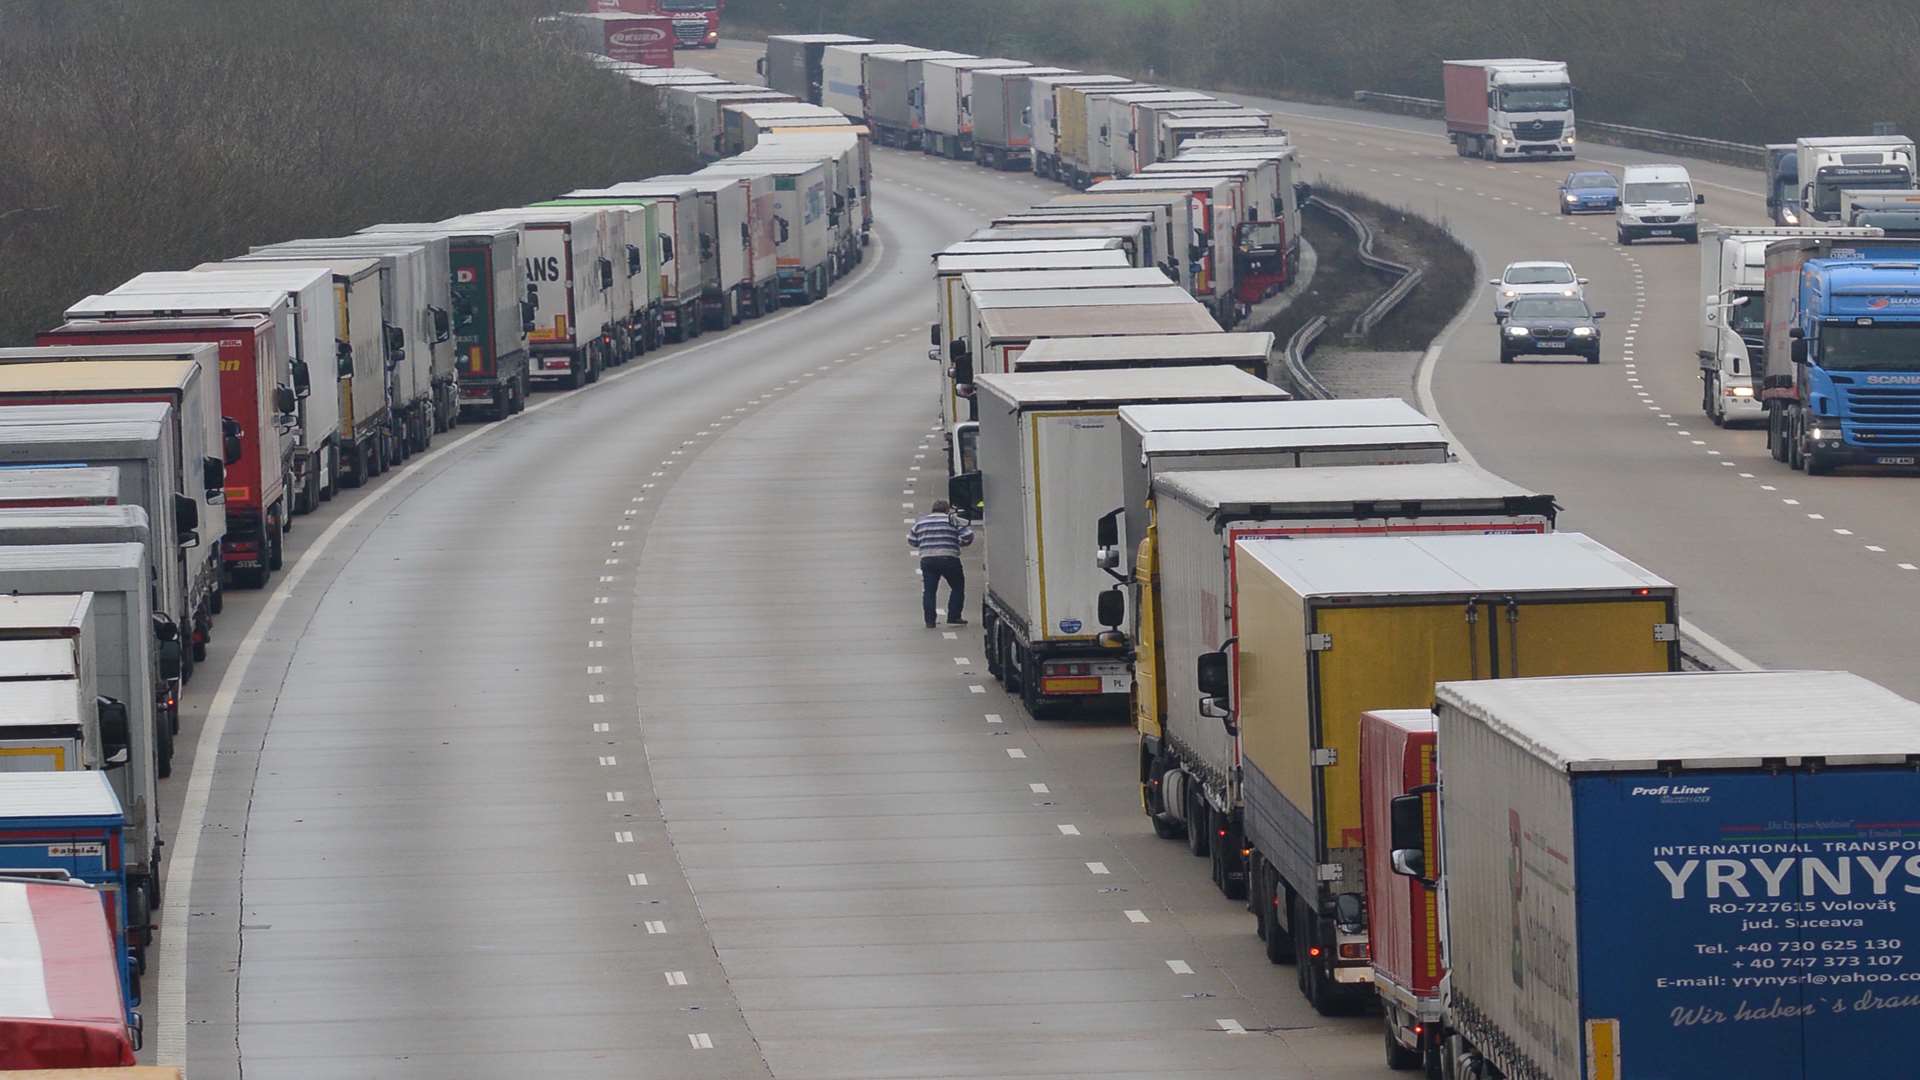 Operation Stack on the M20